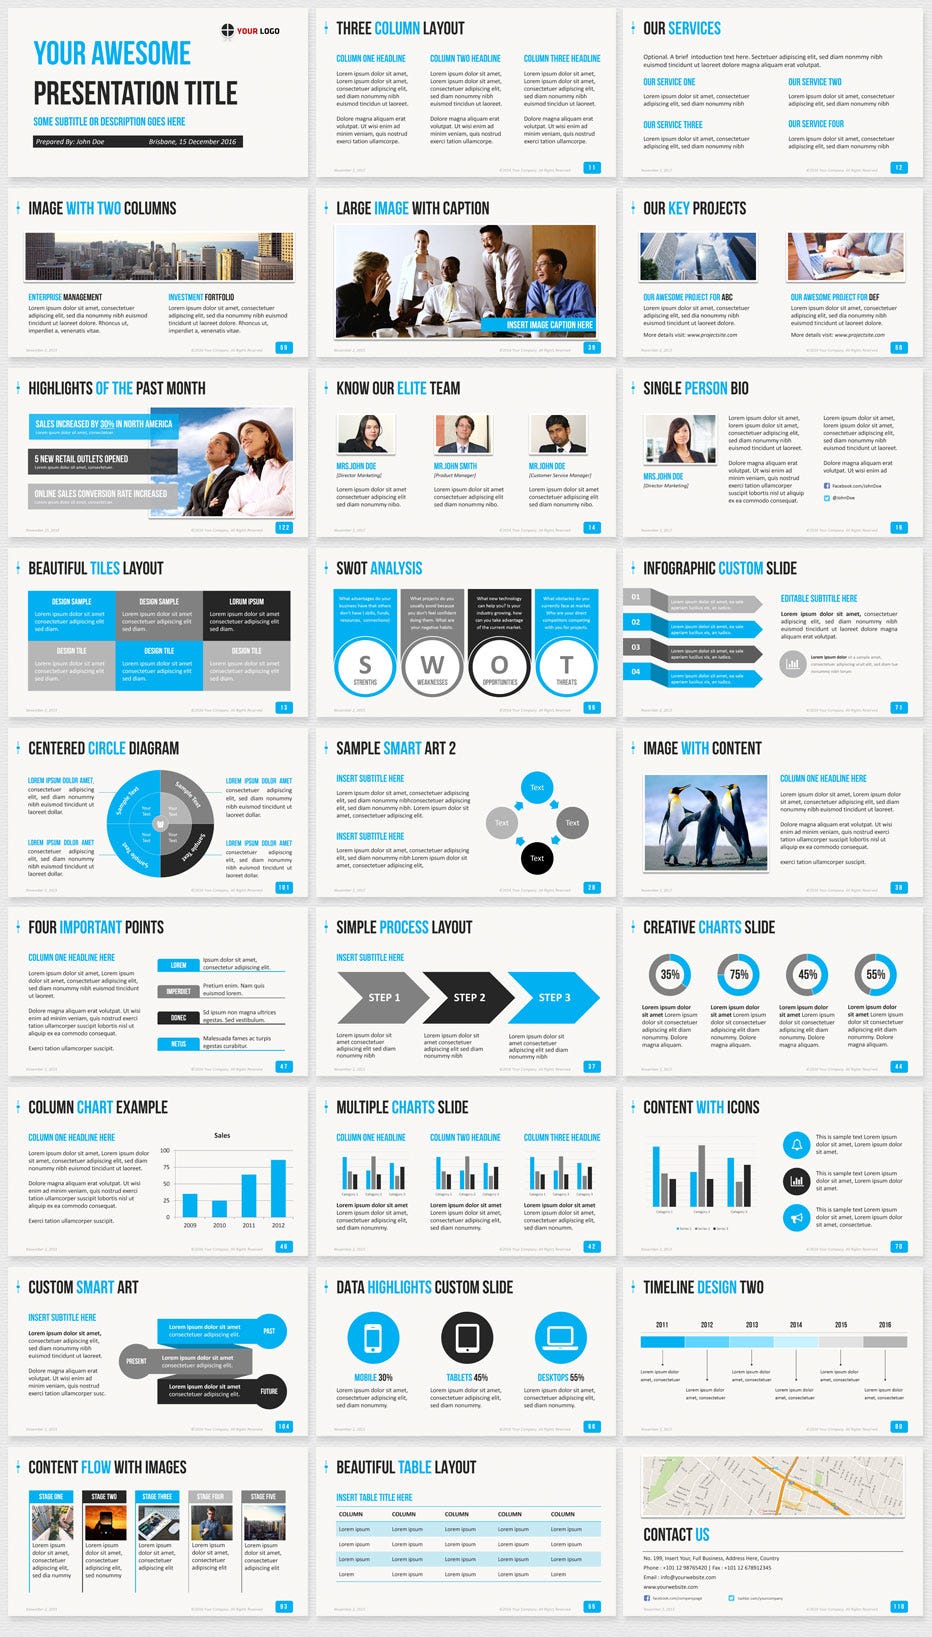 Professional Presentation Templates OR Free PowerPoint ...